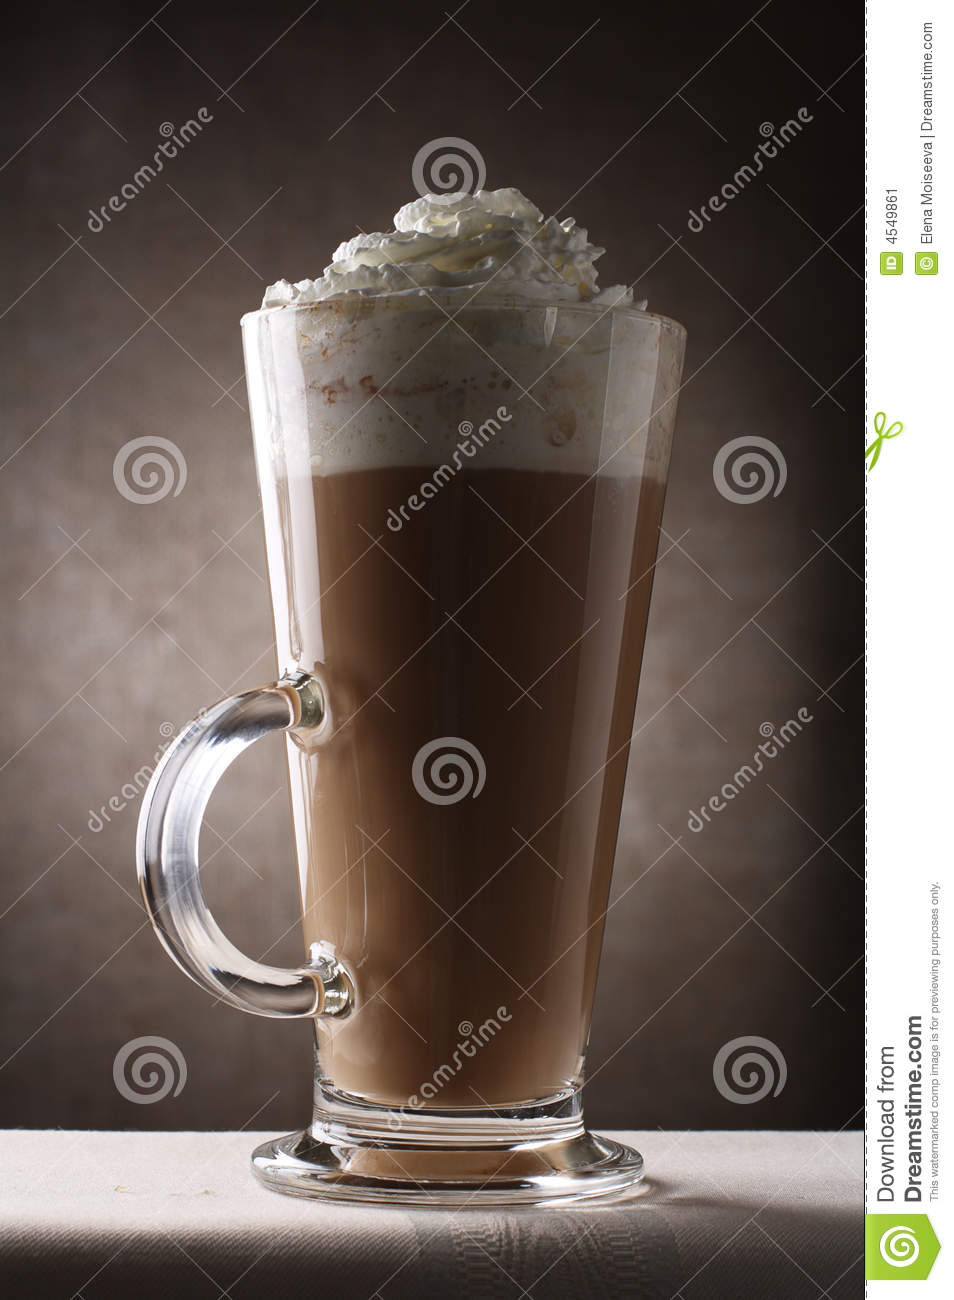 Coffee Latte In Tall Glass Rustic Background Stock Image   Image